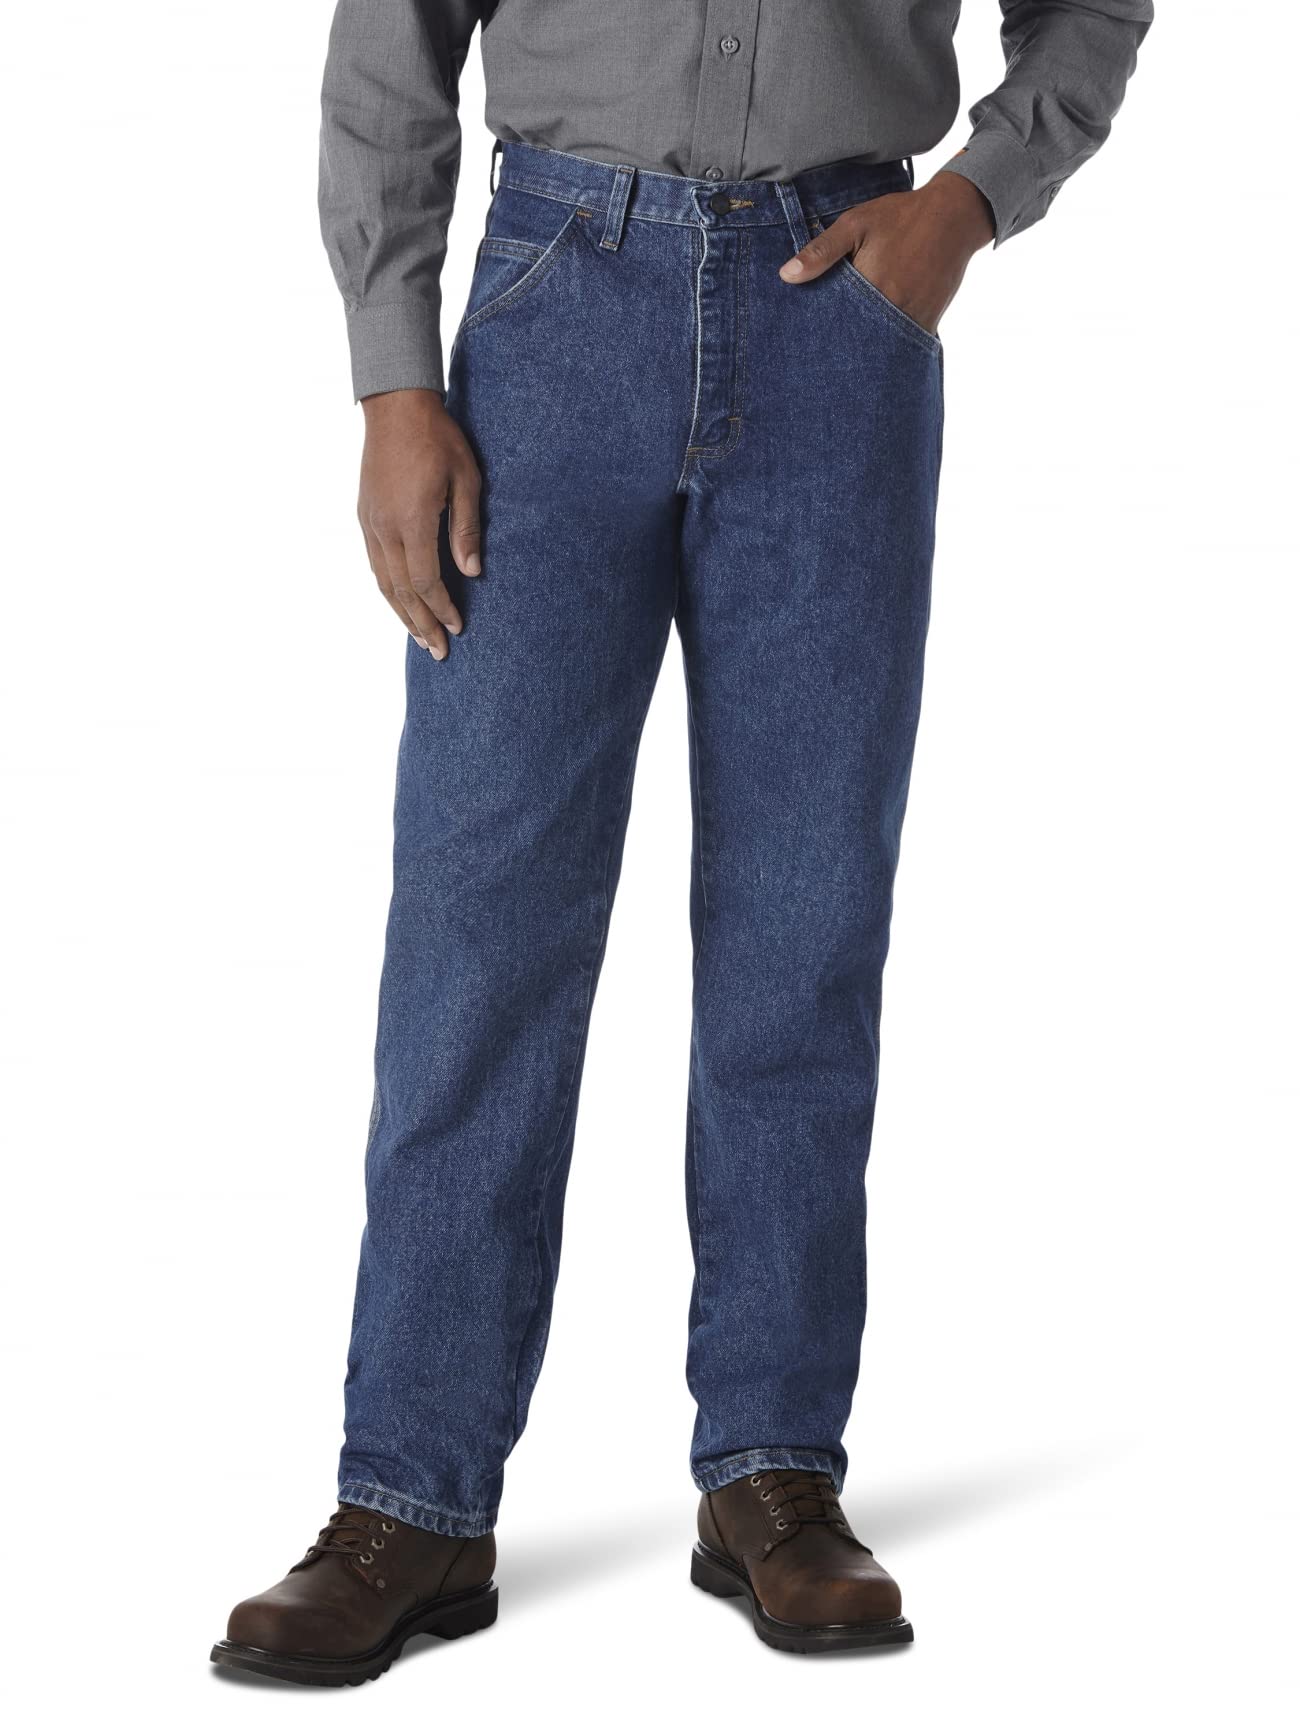 Wrangler Riggs Workwear Men's FR Flame Resistant Relaxed Fit Jean